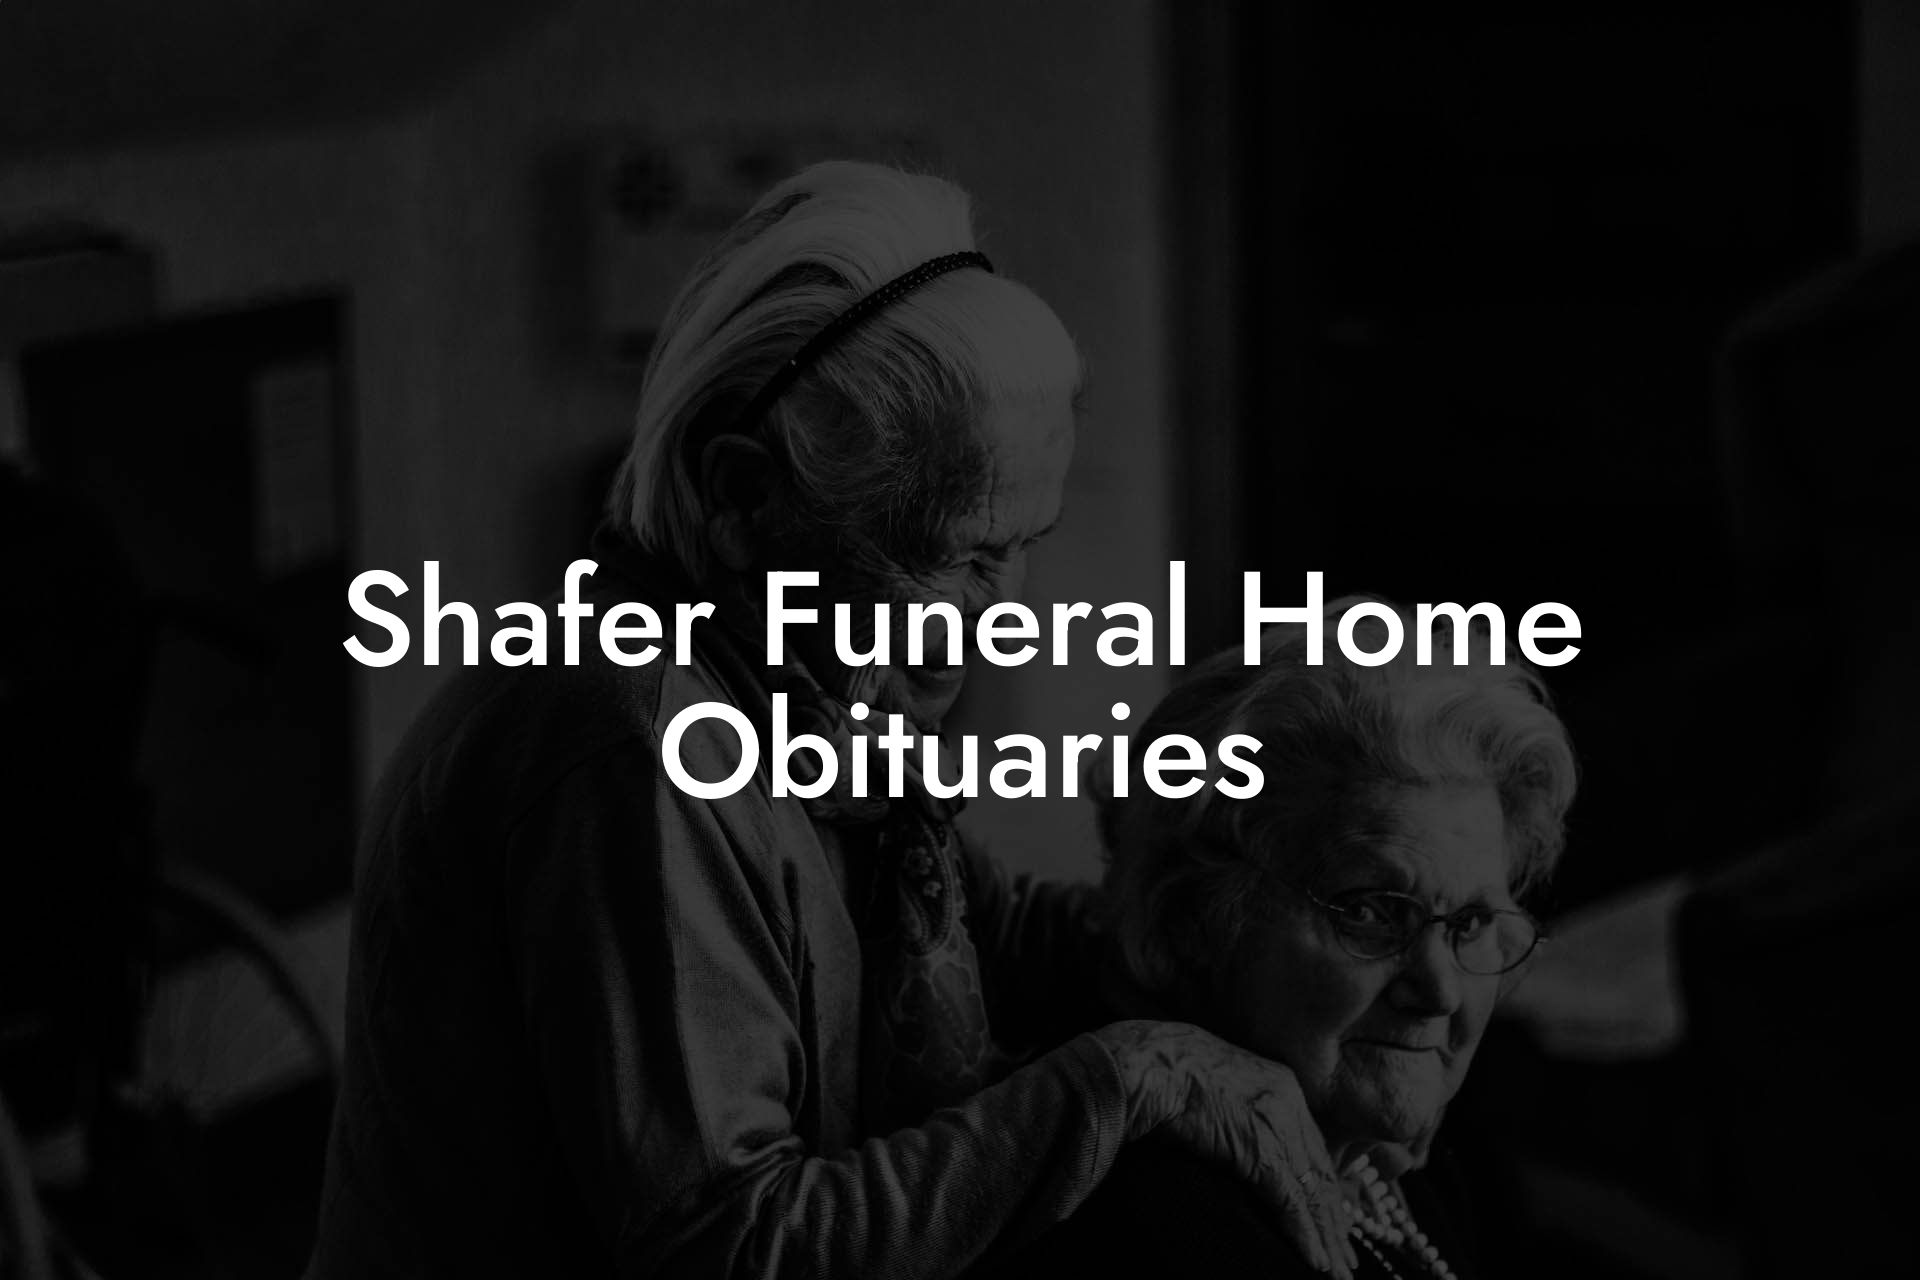 Shafer Funeral Home Obituaries